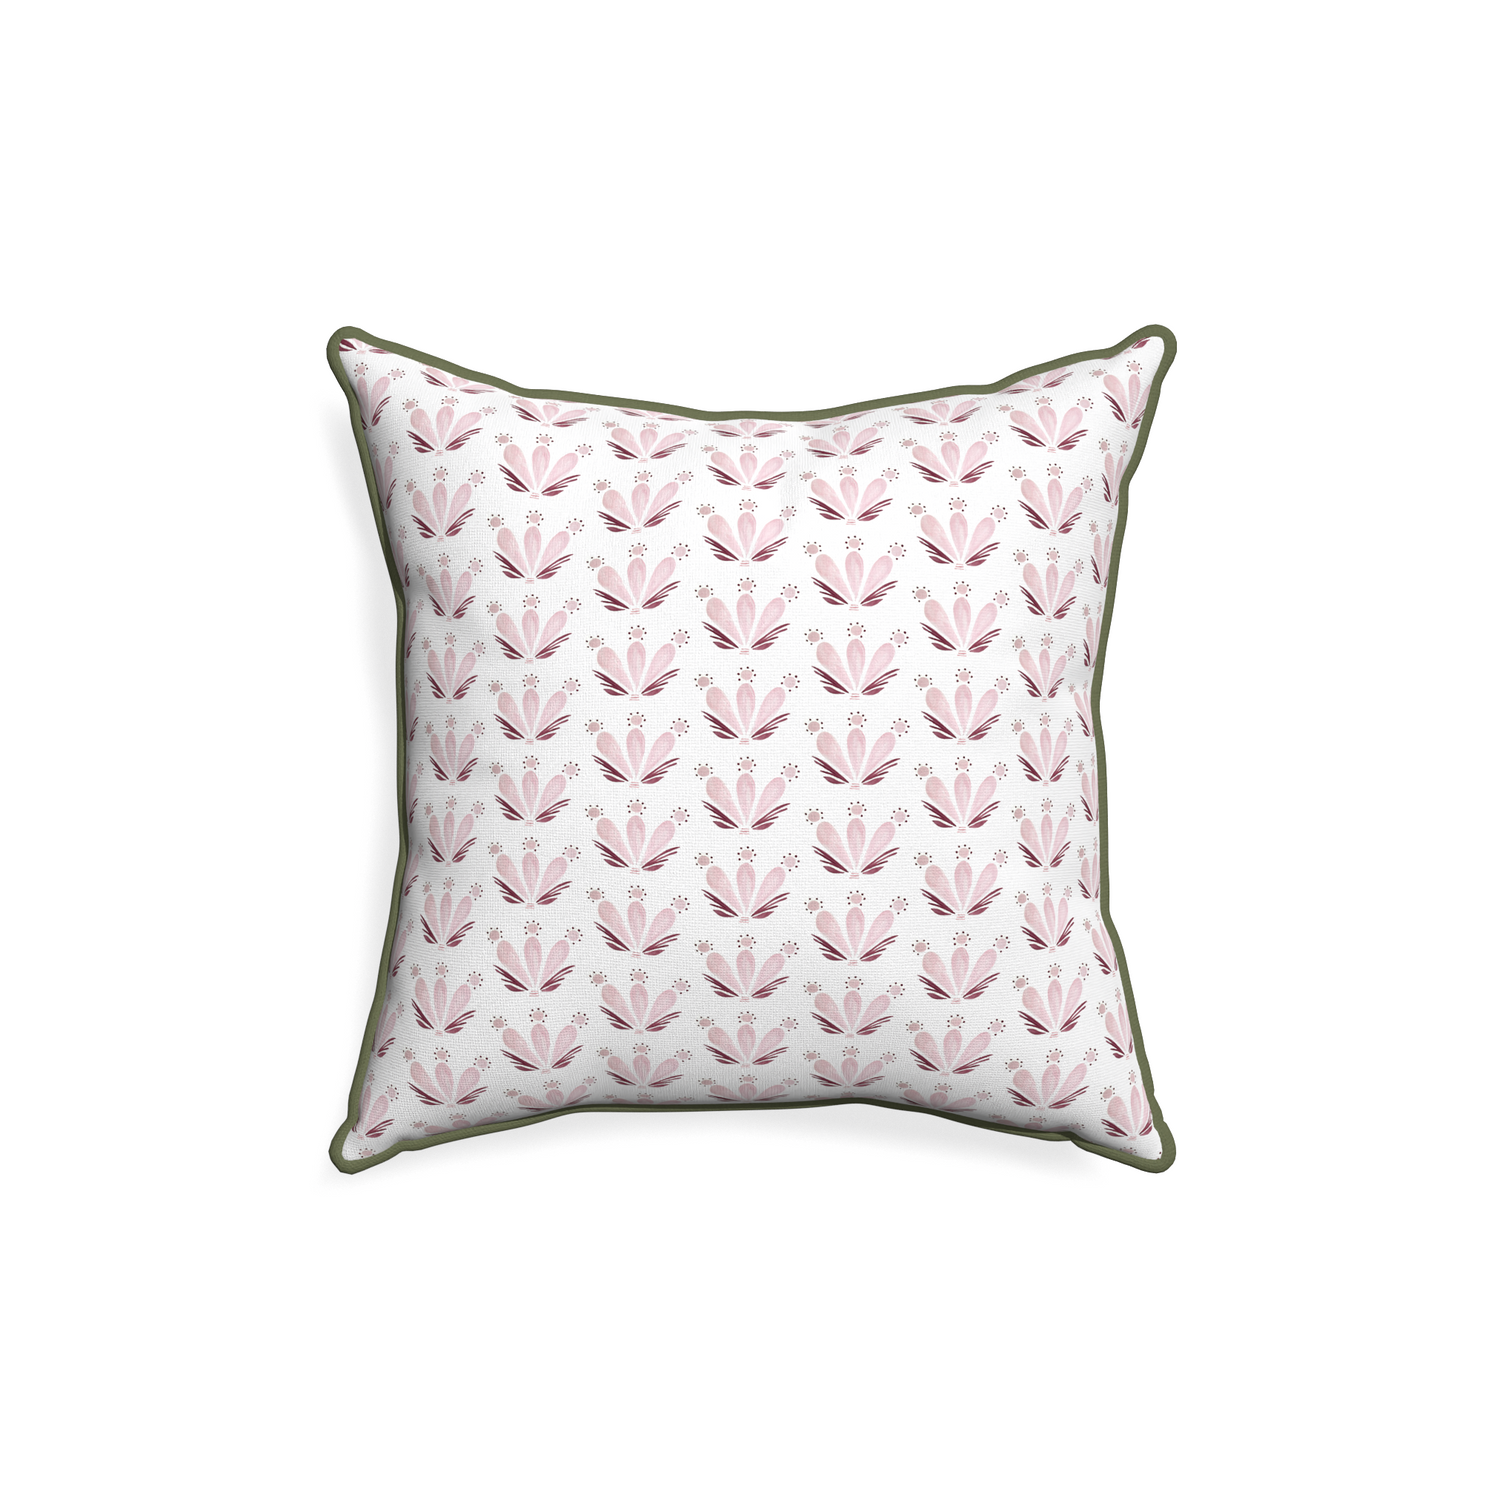 18-square serena pink custom pillow with f piping on white background